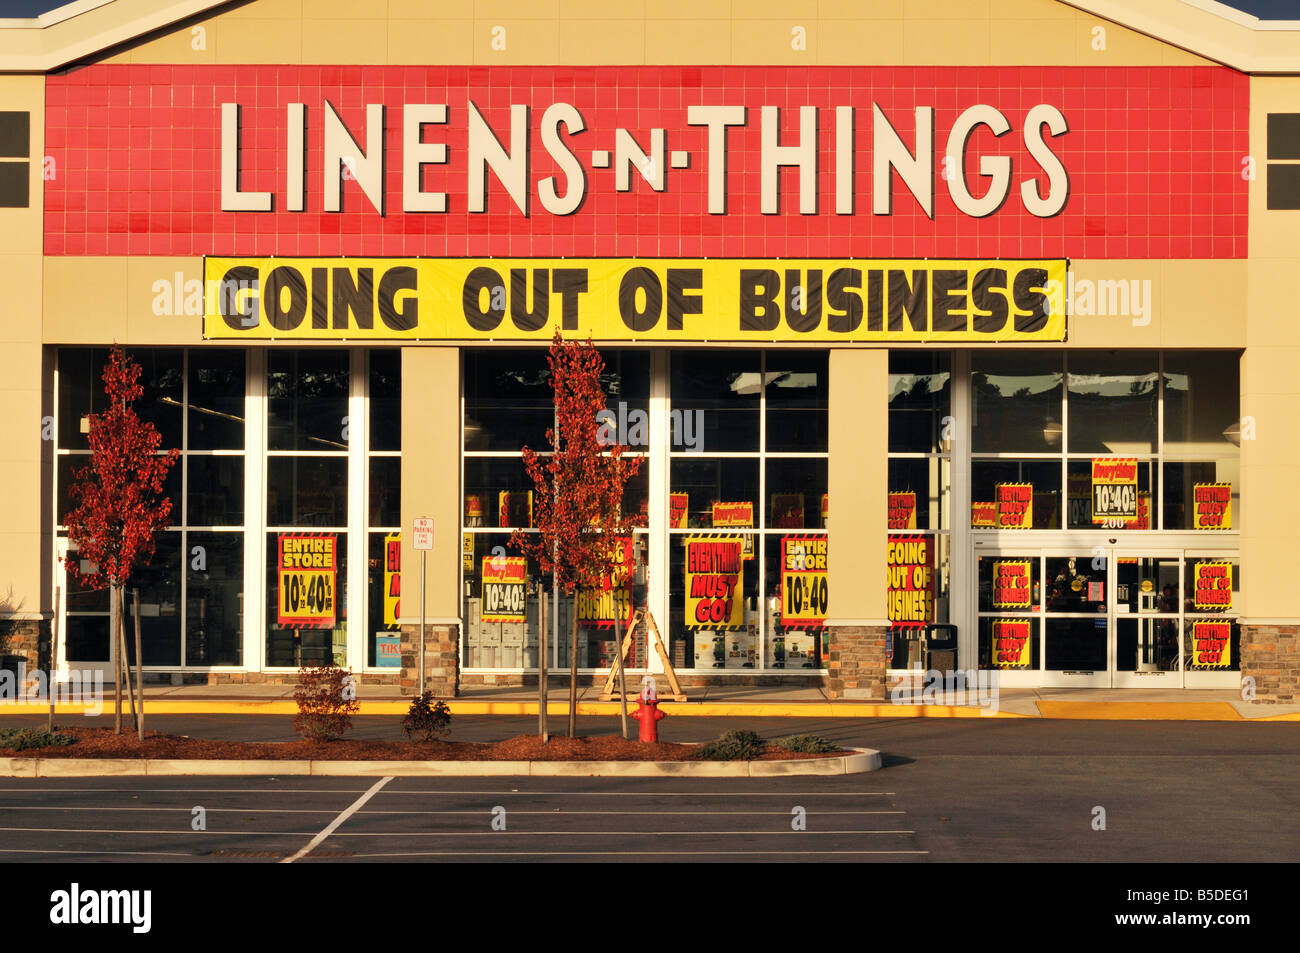 Linens n and Things retail store going out of business sale with signs and banner Stock Photo